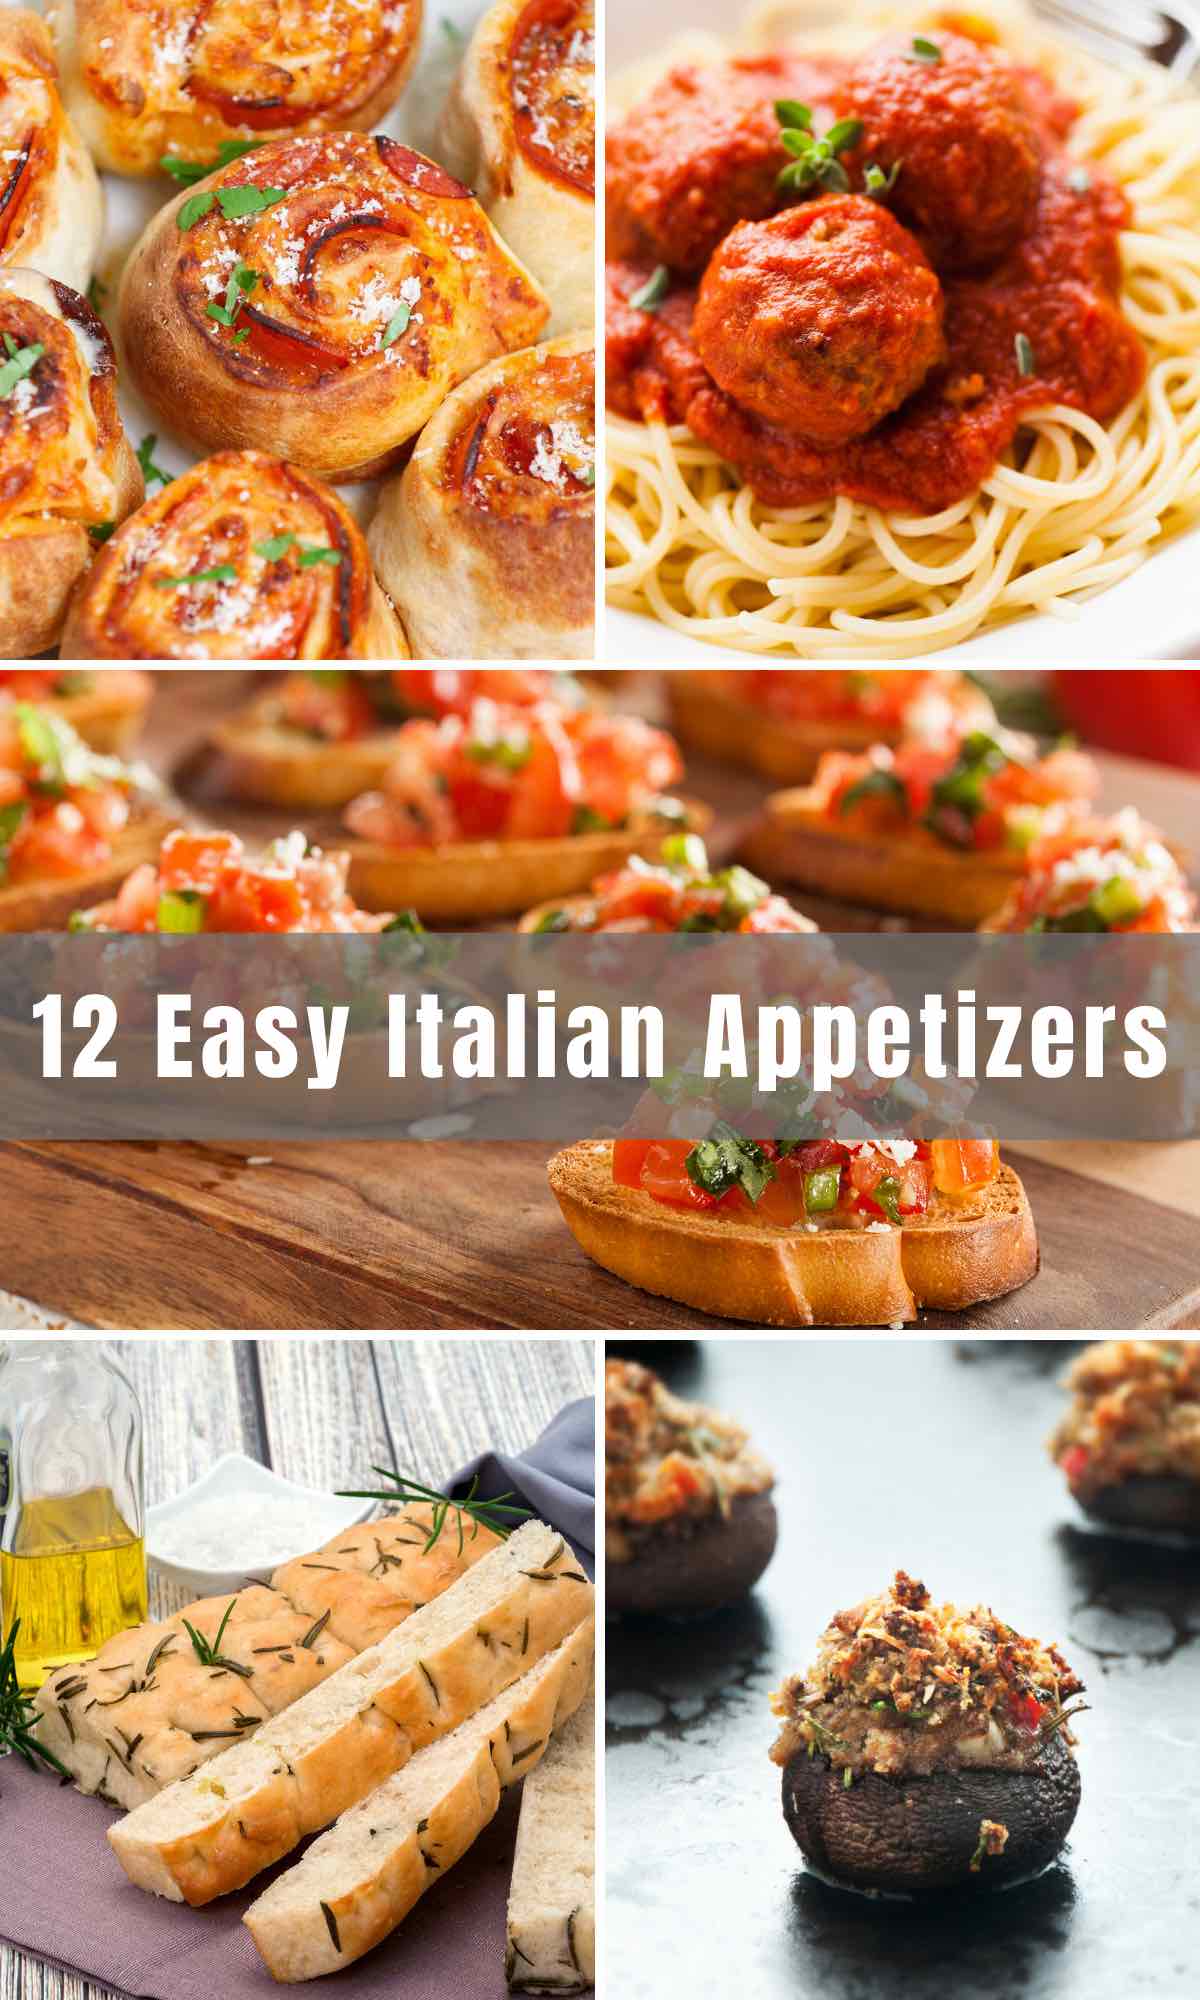 These 12 Best Italian Appetizers are my go-to appetizer recipes and are great all year round. From the classic Italian bruschetta to the kids-friendly Italian meatballs, these crowd-pleasing appetizers are easy to prepare and will surely be a hit at your next gathering or party.